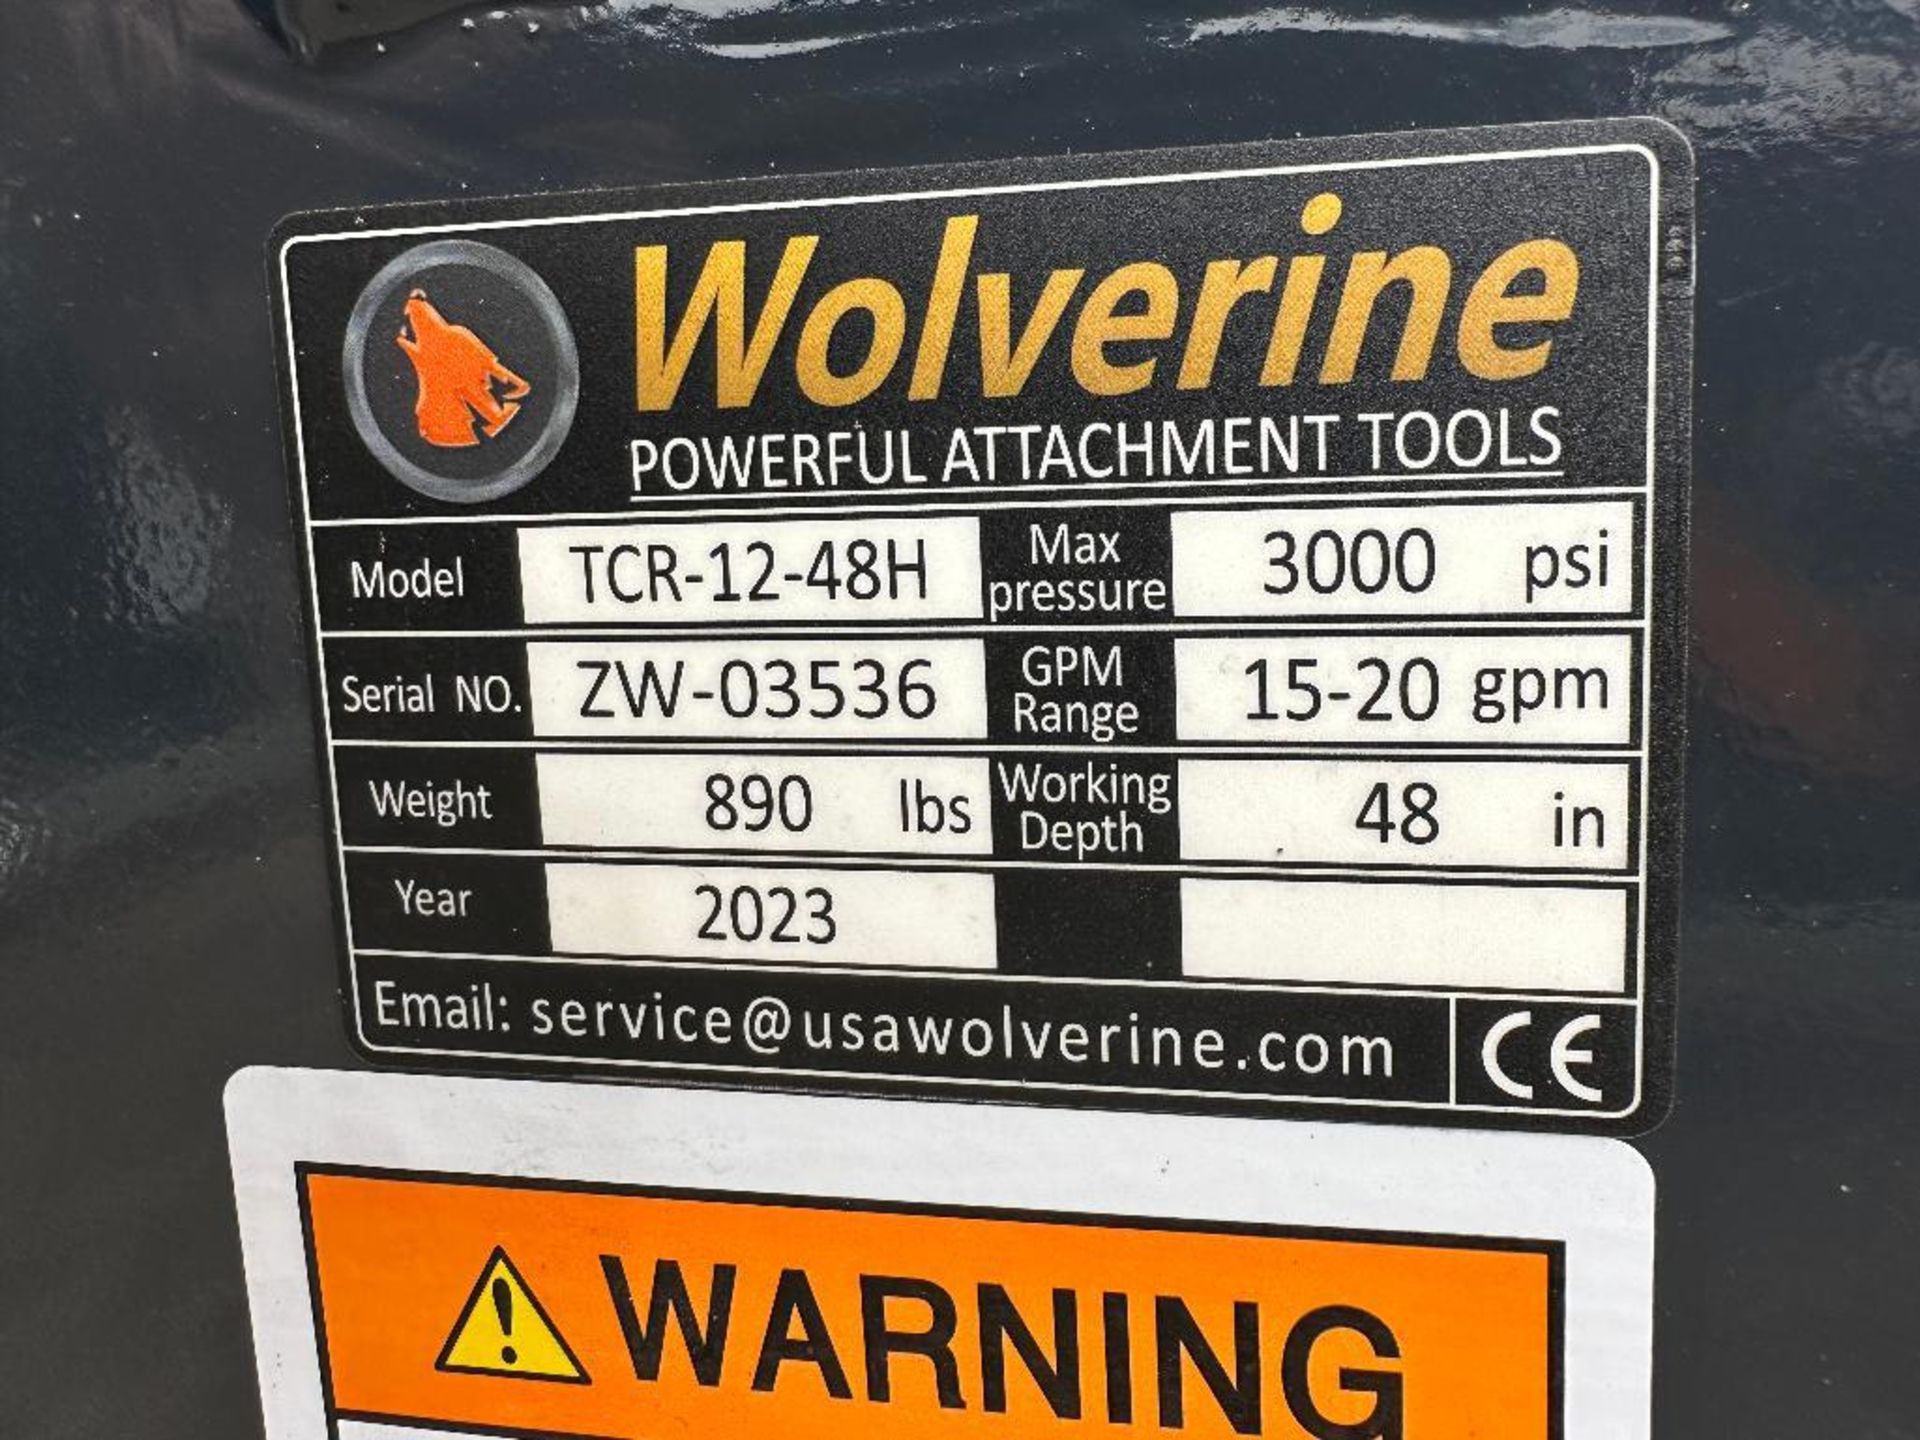 New 2023 Wolverine TCR-12-48H 48" Skid Steer Trencher Attachment - Image 4 of 4